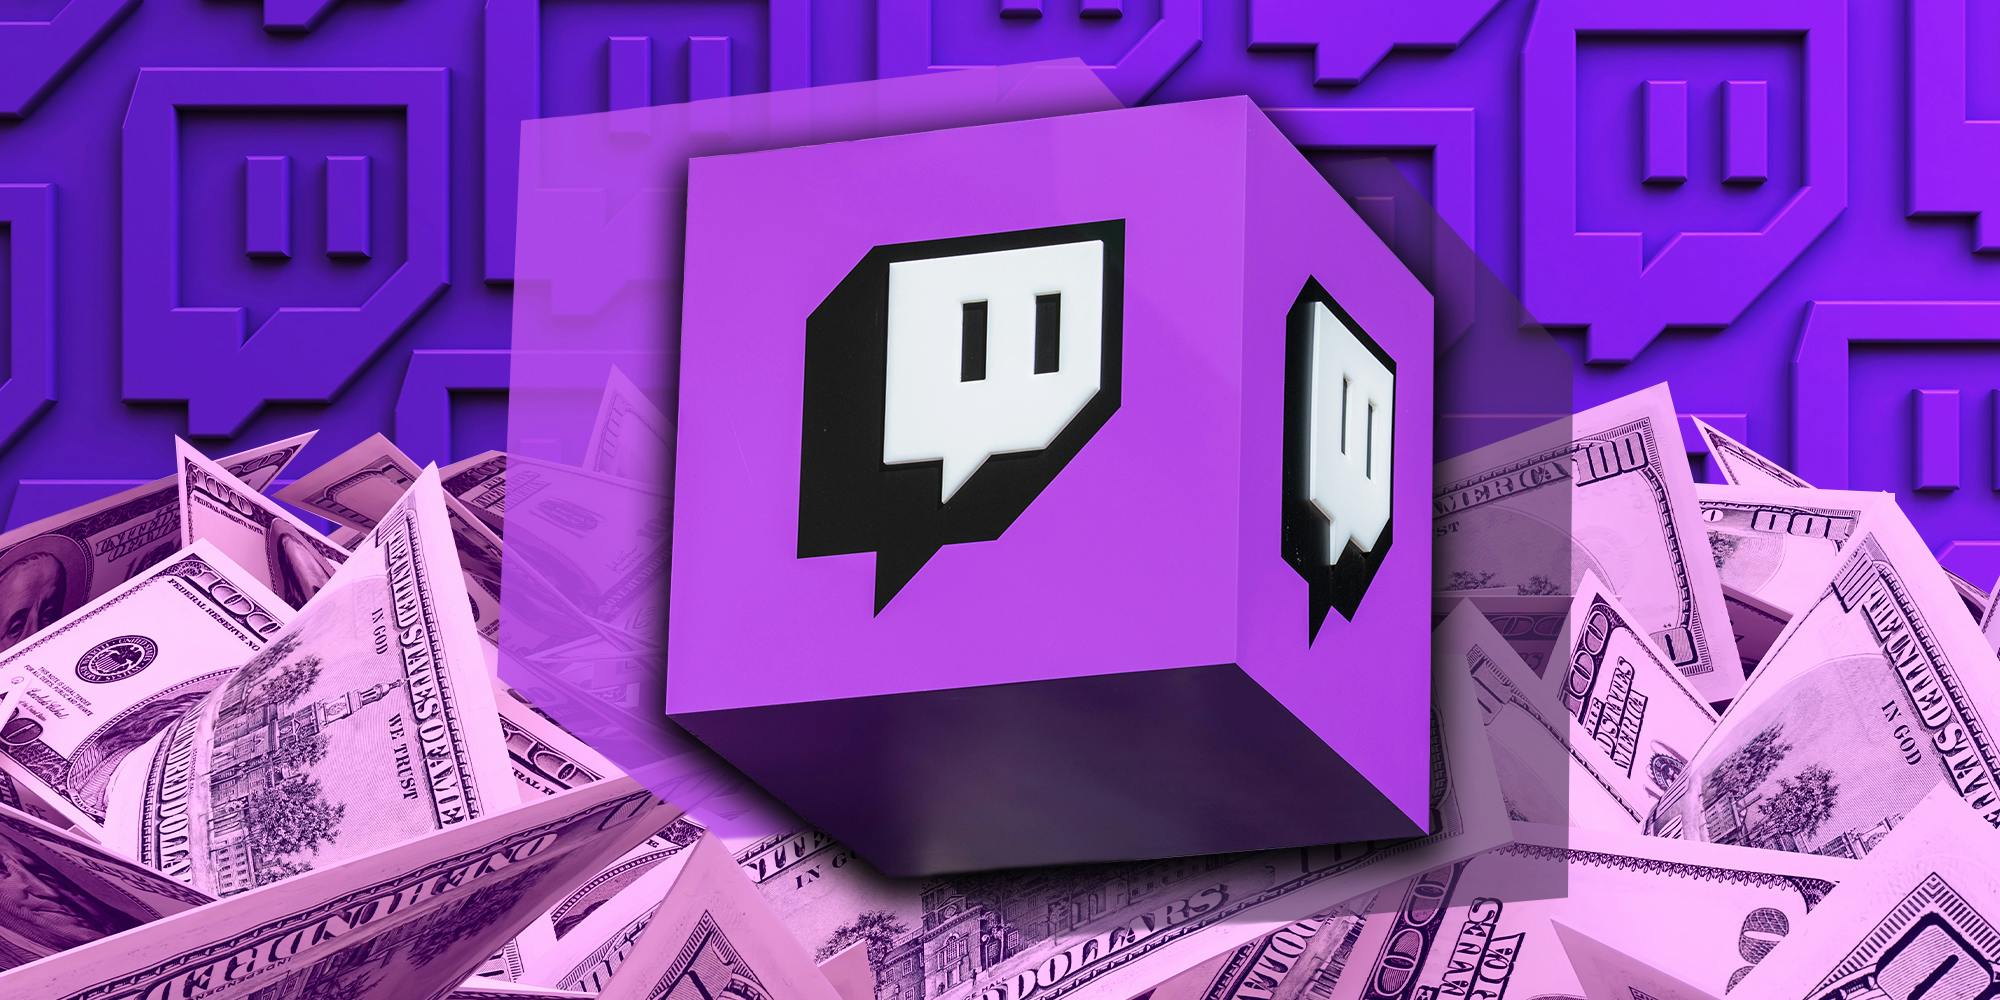 Twitch Hikes Its Subscription Prices, and Some Creators Aren’t Happy